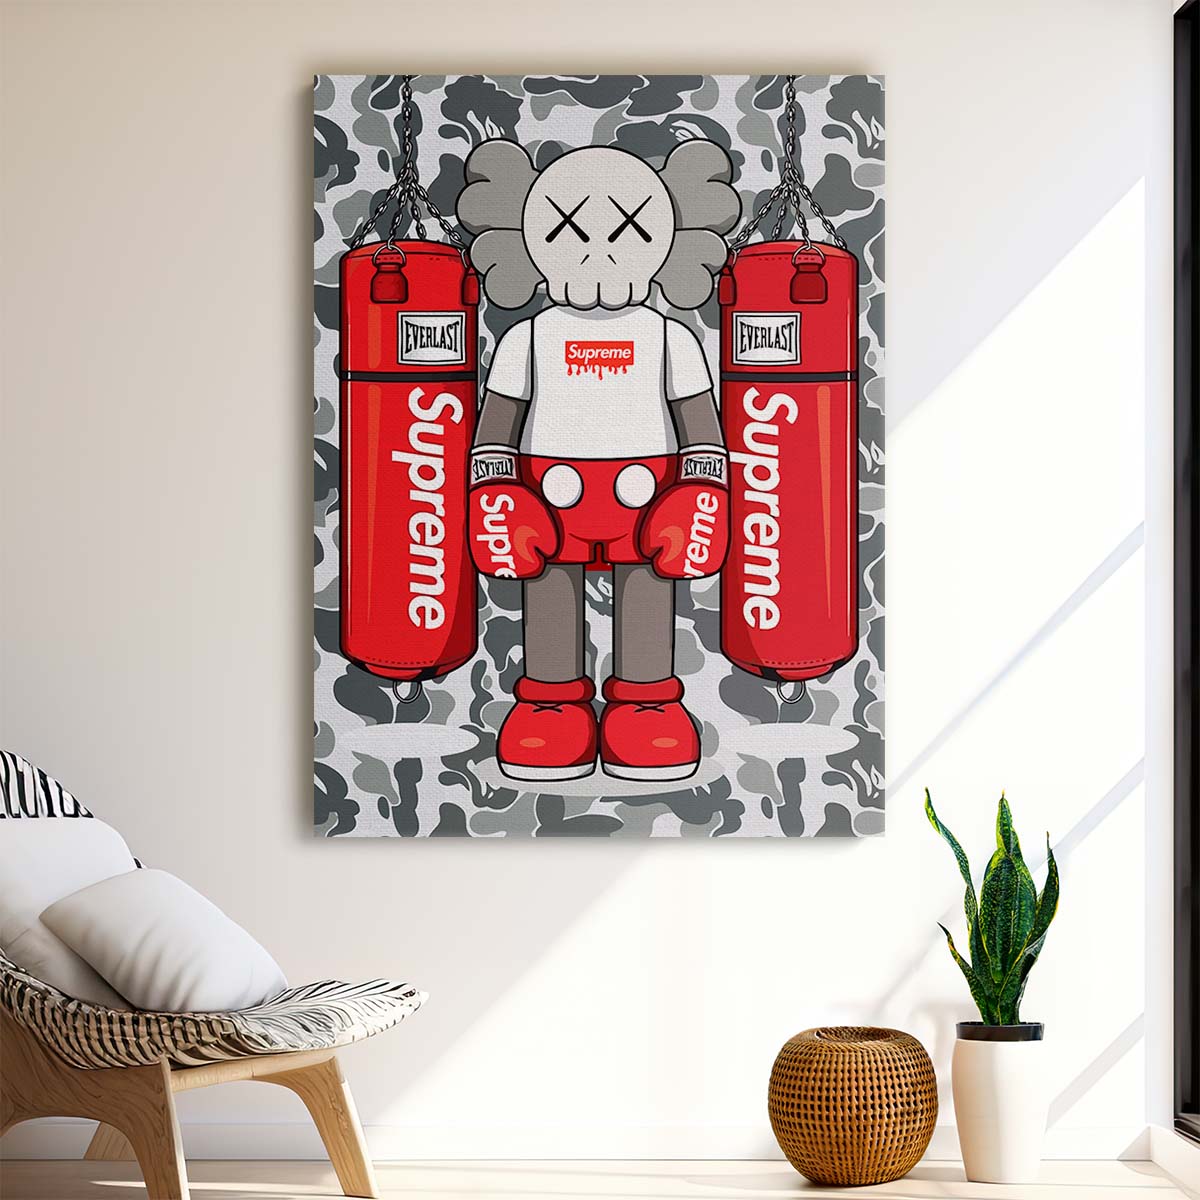 Supreme Kaws Fighter Everlast Wall Art by Luxuriance Designs. Made in USA.